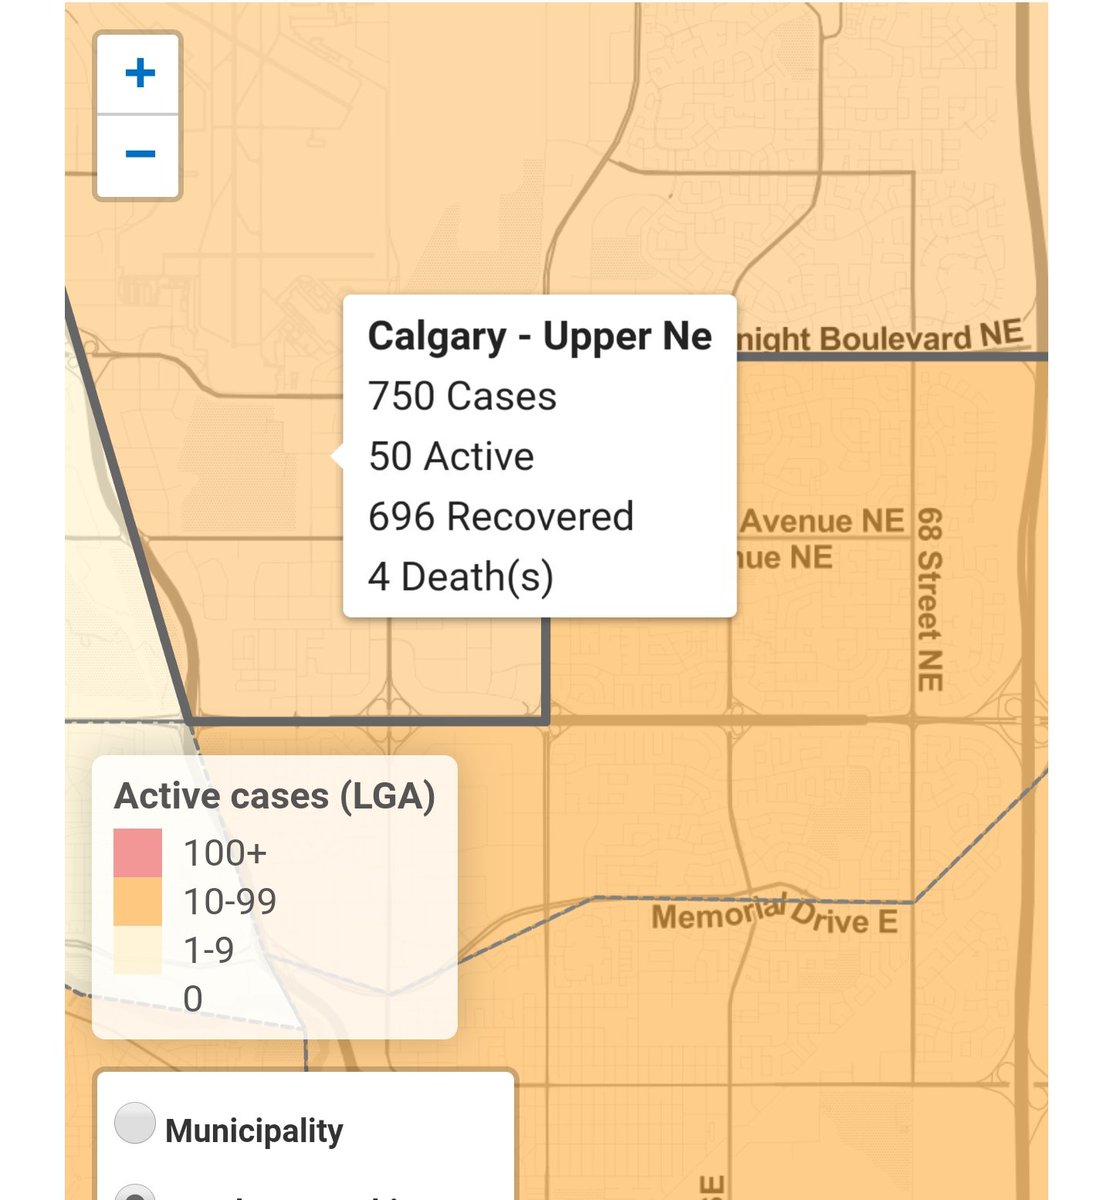 While we don't have the same analysis avail in AB, this is applicable to  #yyc Calgary. I spoke to  @CBCEyeopener in May about how NE YYC (discussed in  @sprawlcalgary piece later)was disproportionately affected by  #COVID19AB cases. This persists today https://twitter.com/CBCEyeopener/status/1260195234157338625?s=19